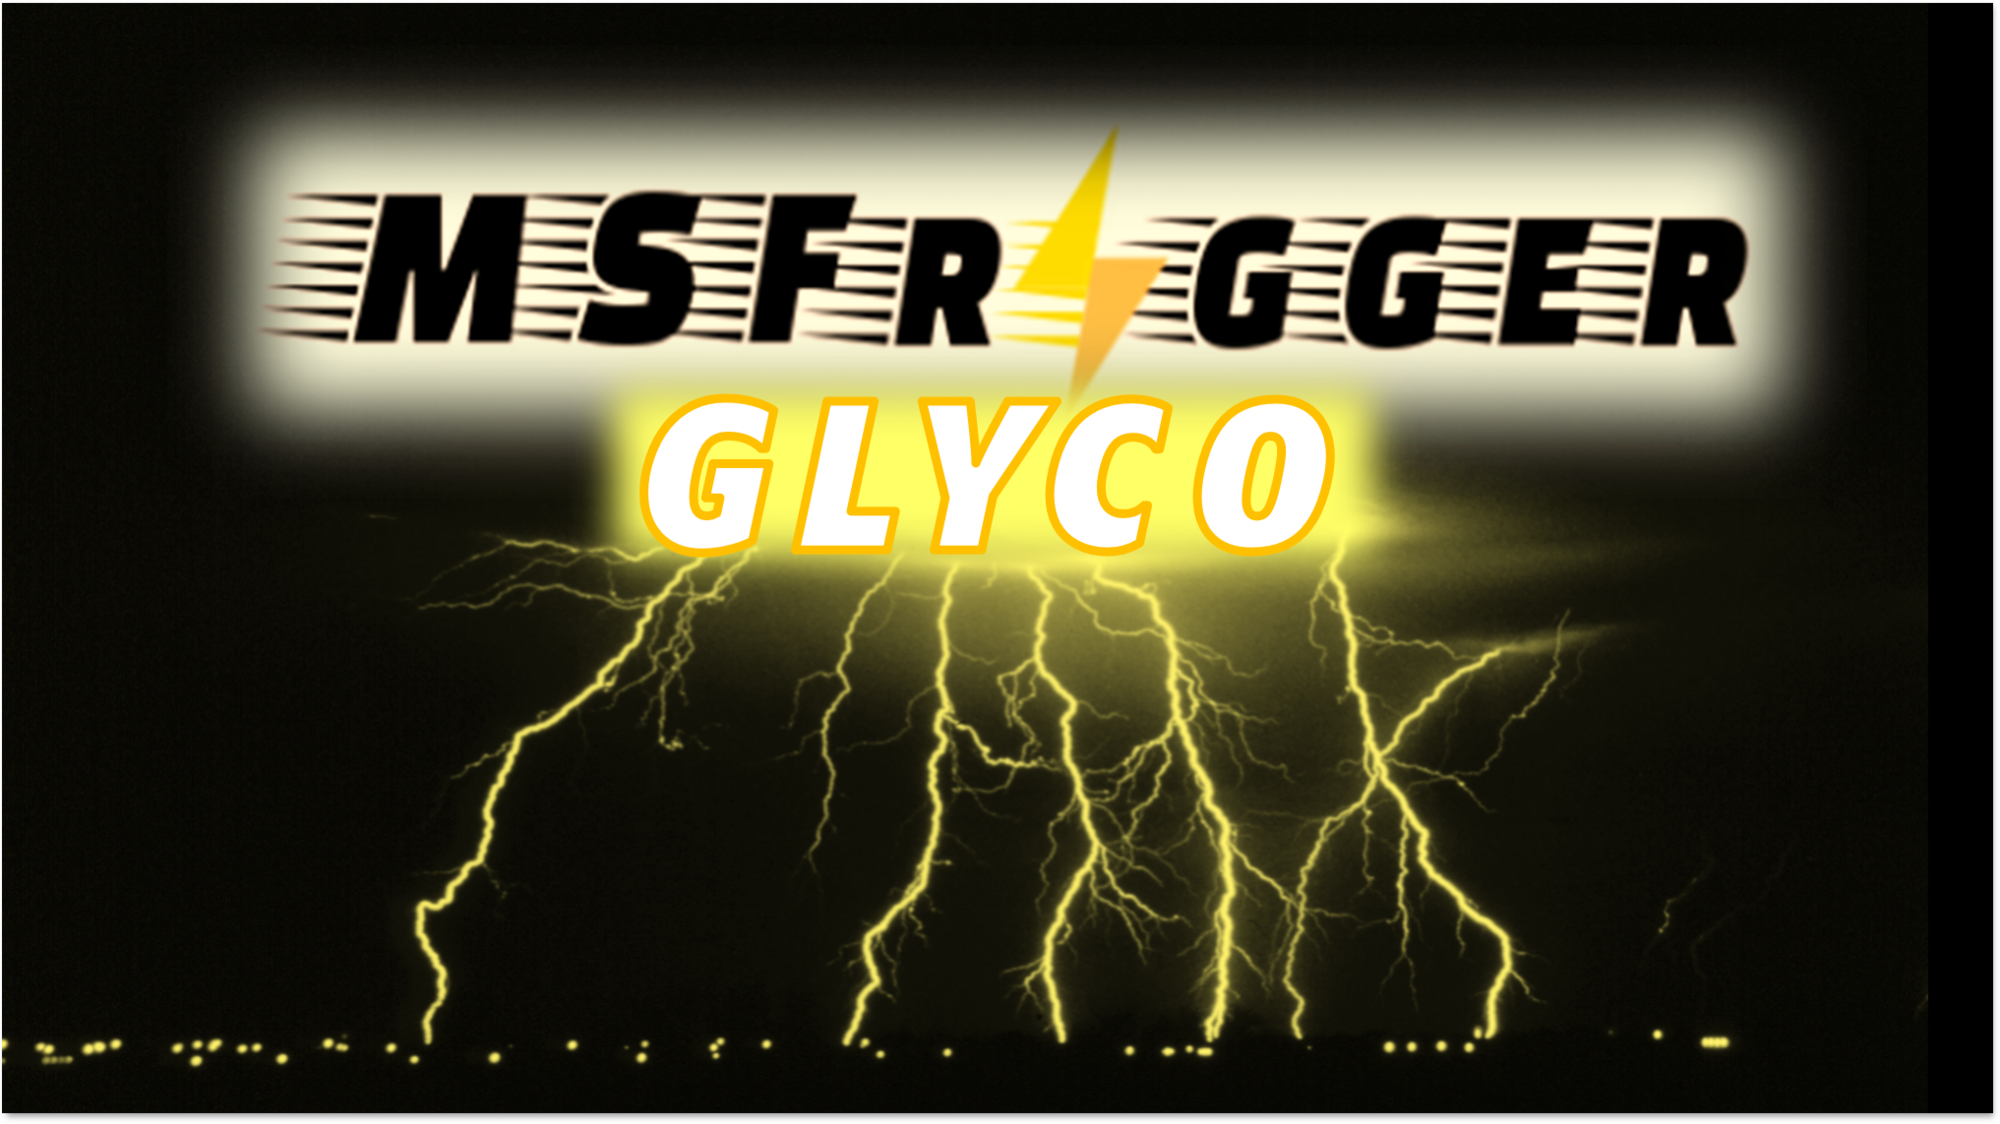 Depiction of lightning bolts showering down upon an illuminated city. The bolts issue from a large "cloud" that reads "MSFragger Glyco."